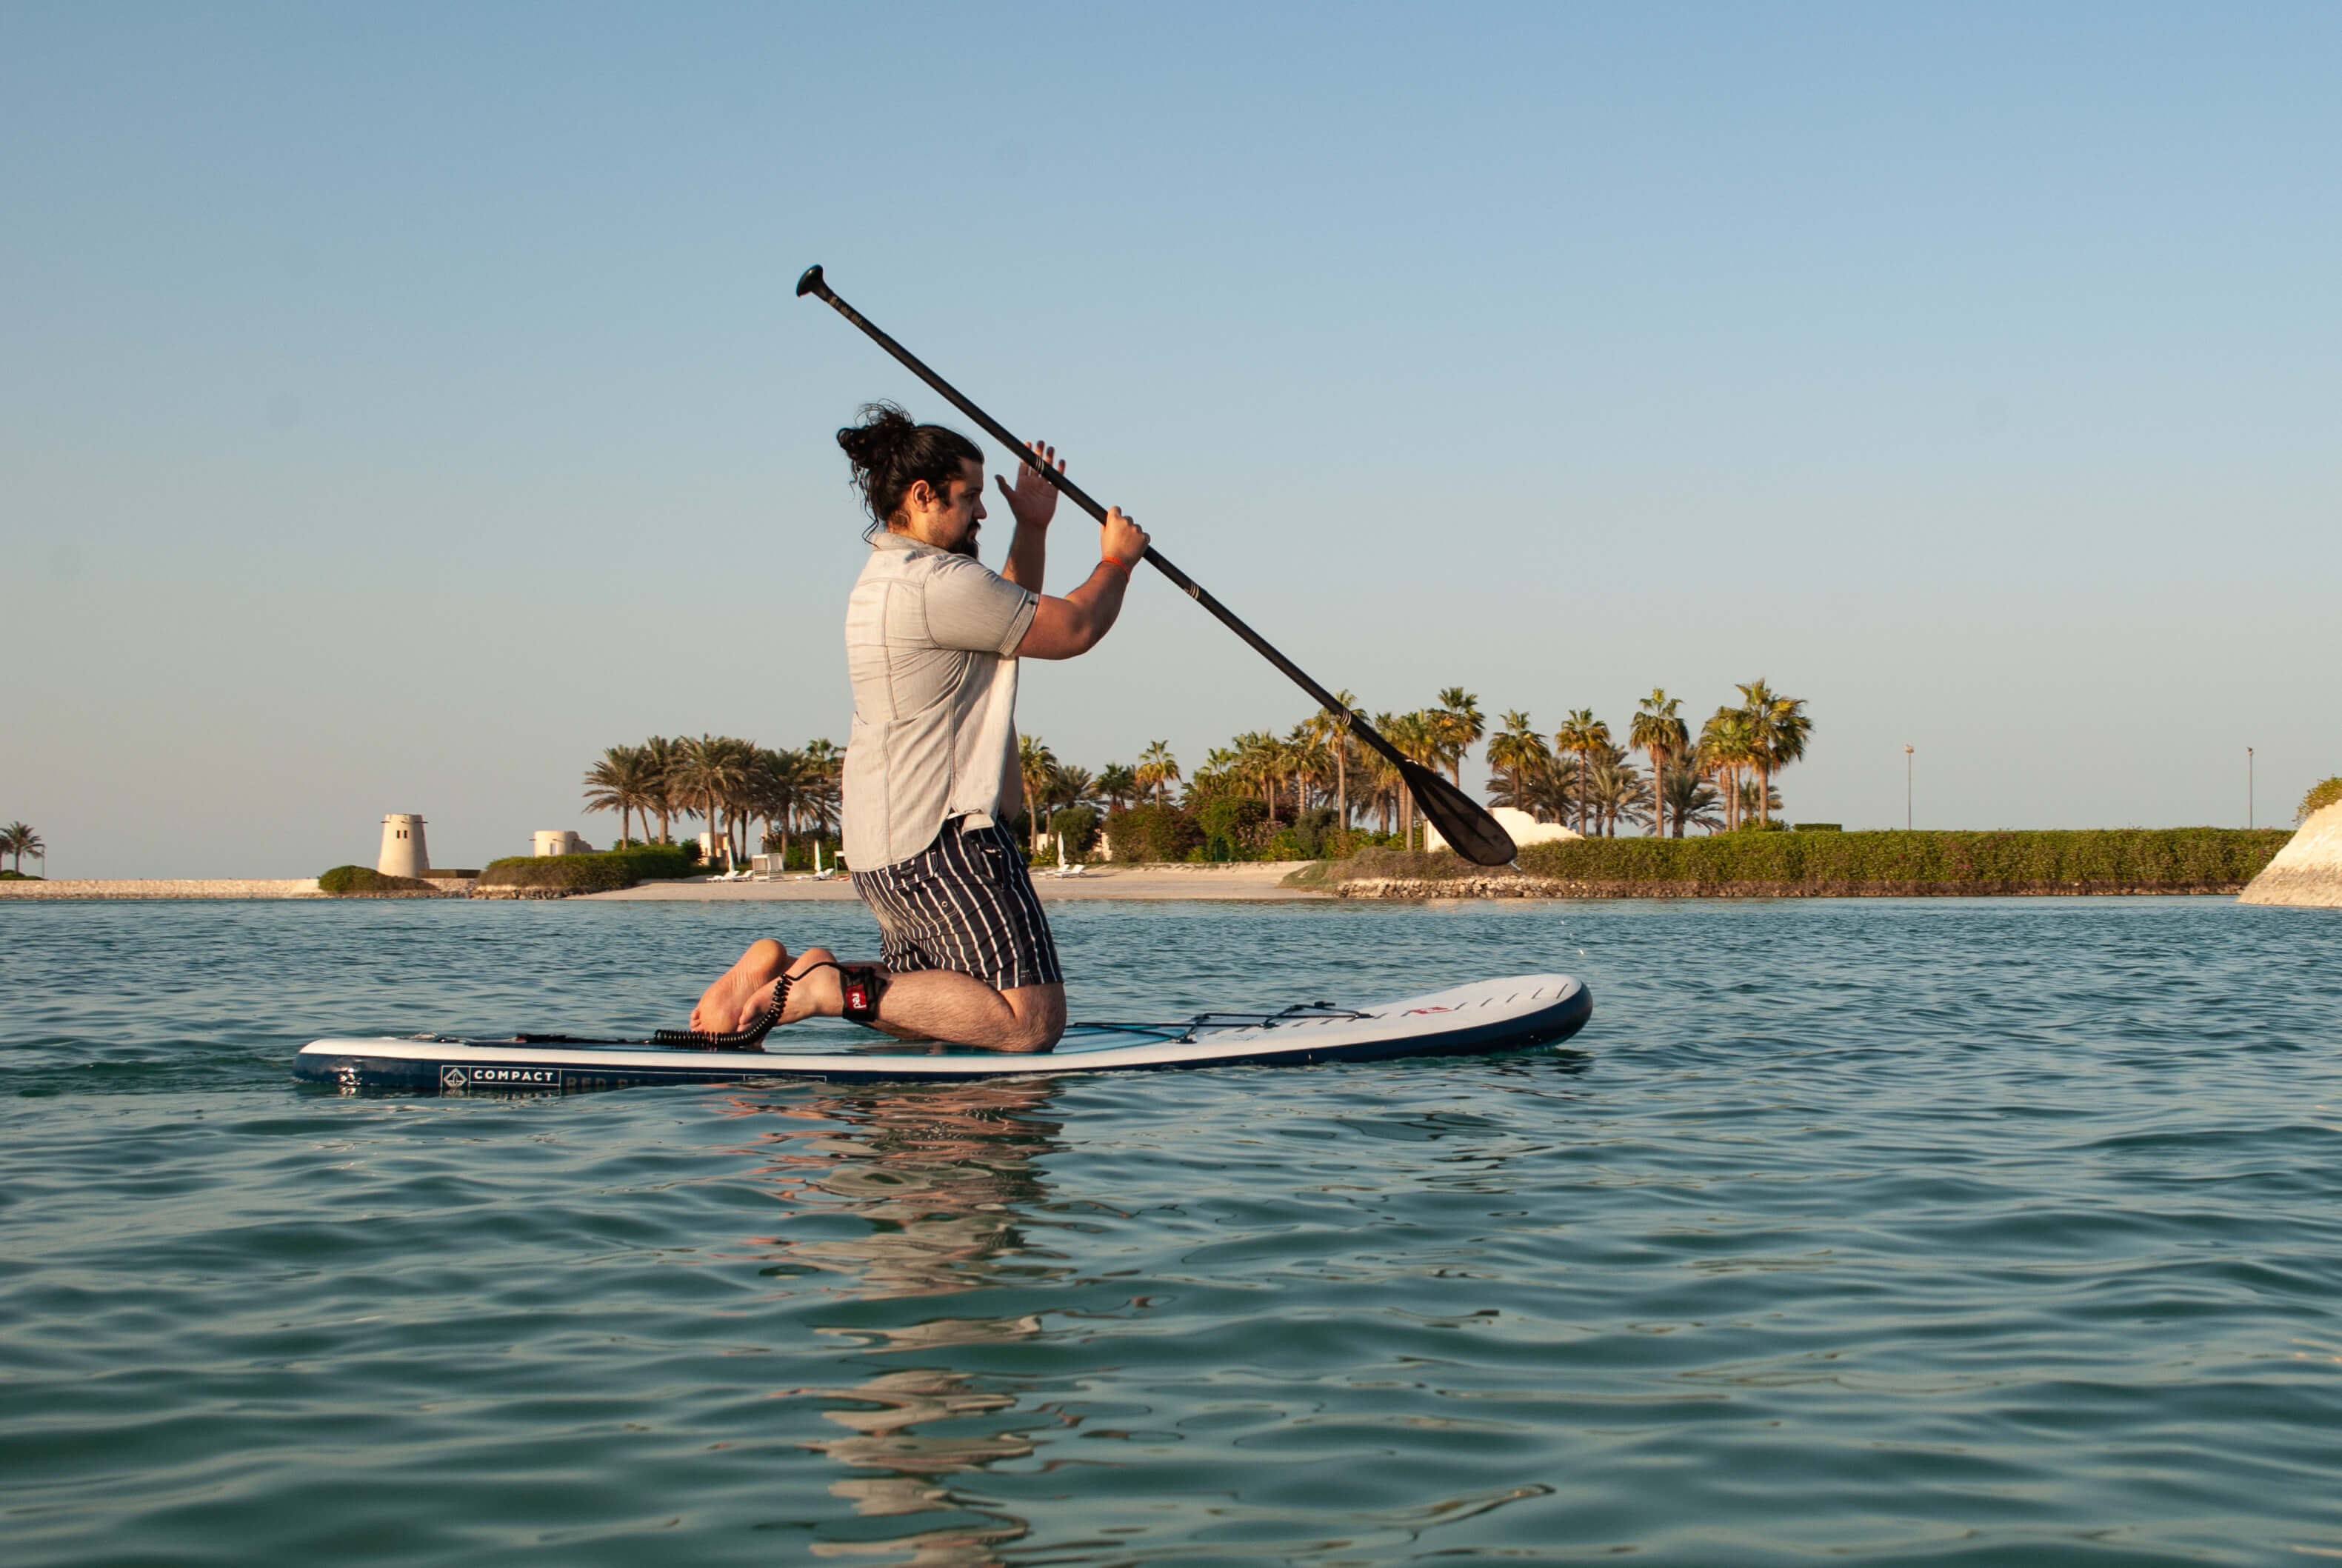 Beginner Learning To Paddle Board While Kneeling on a Compact SUP